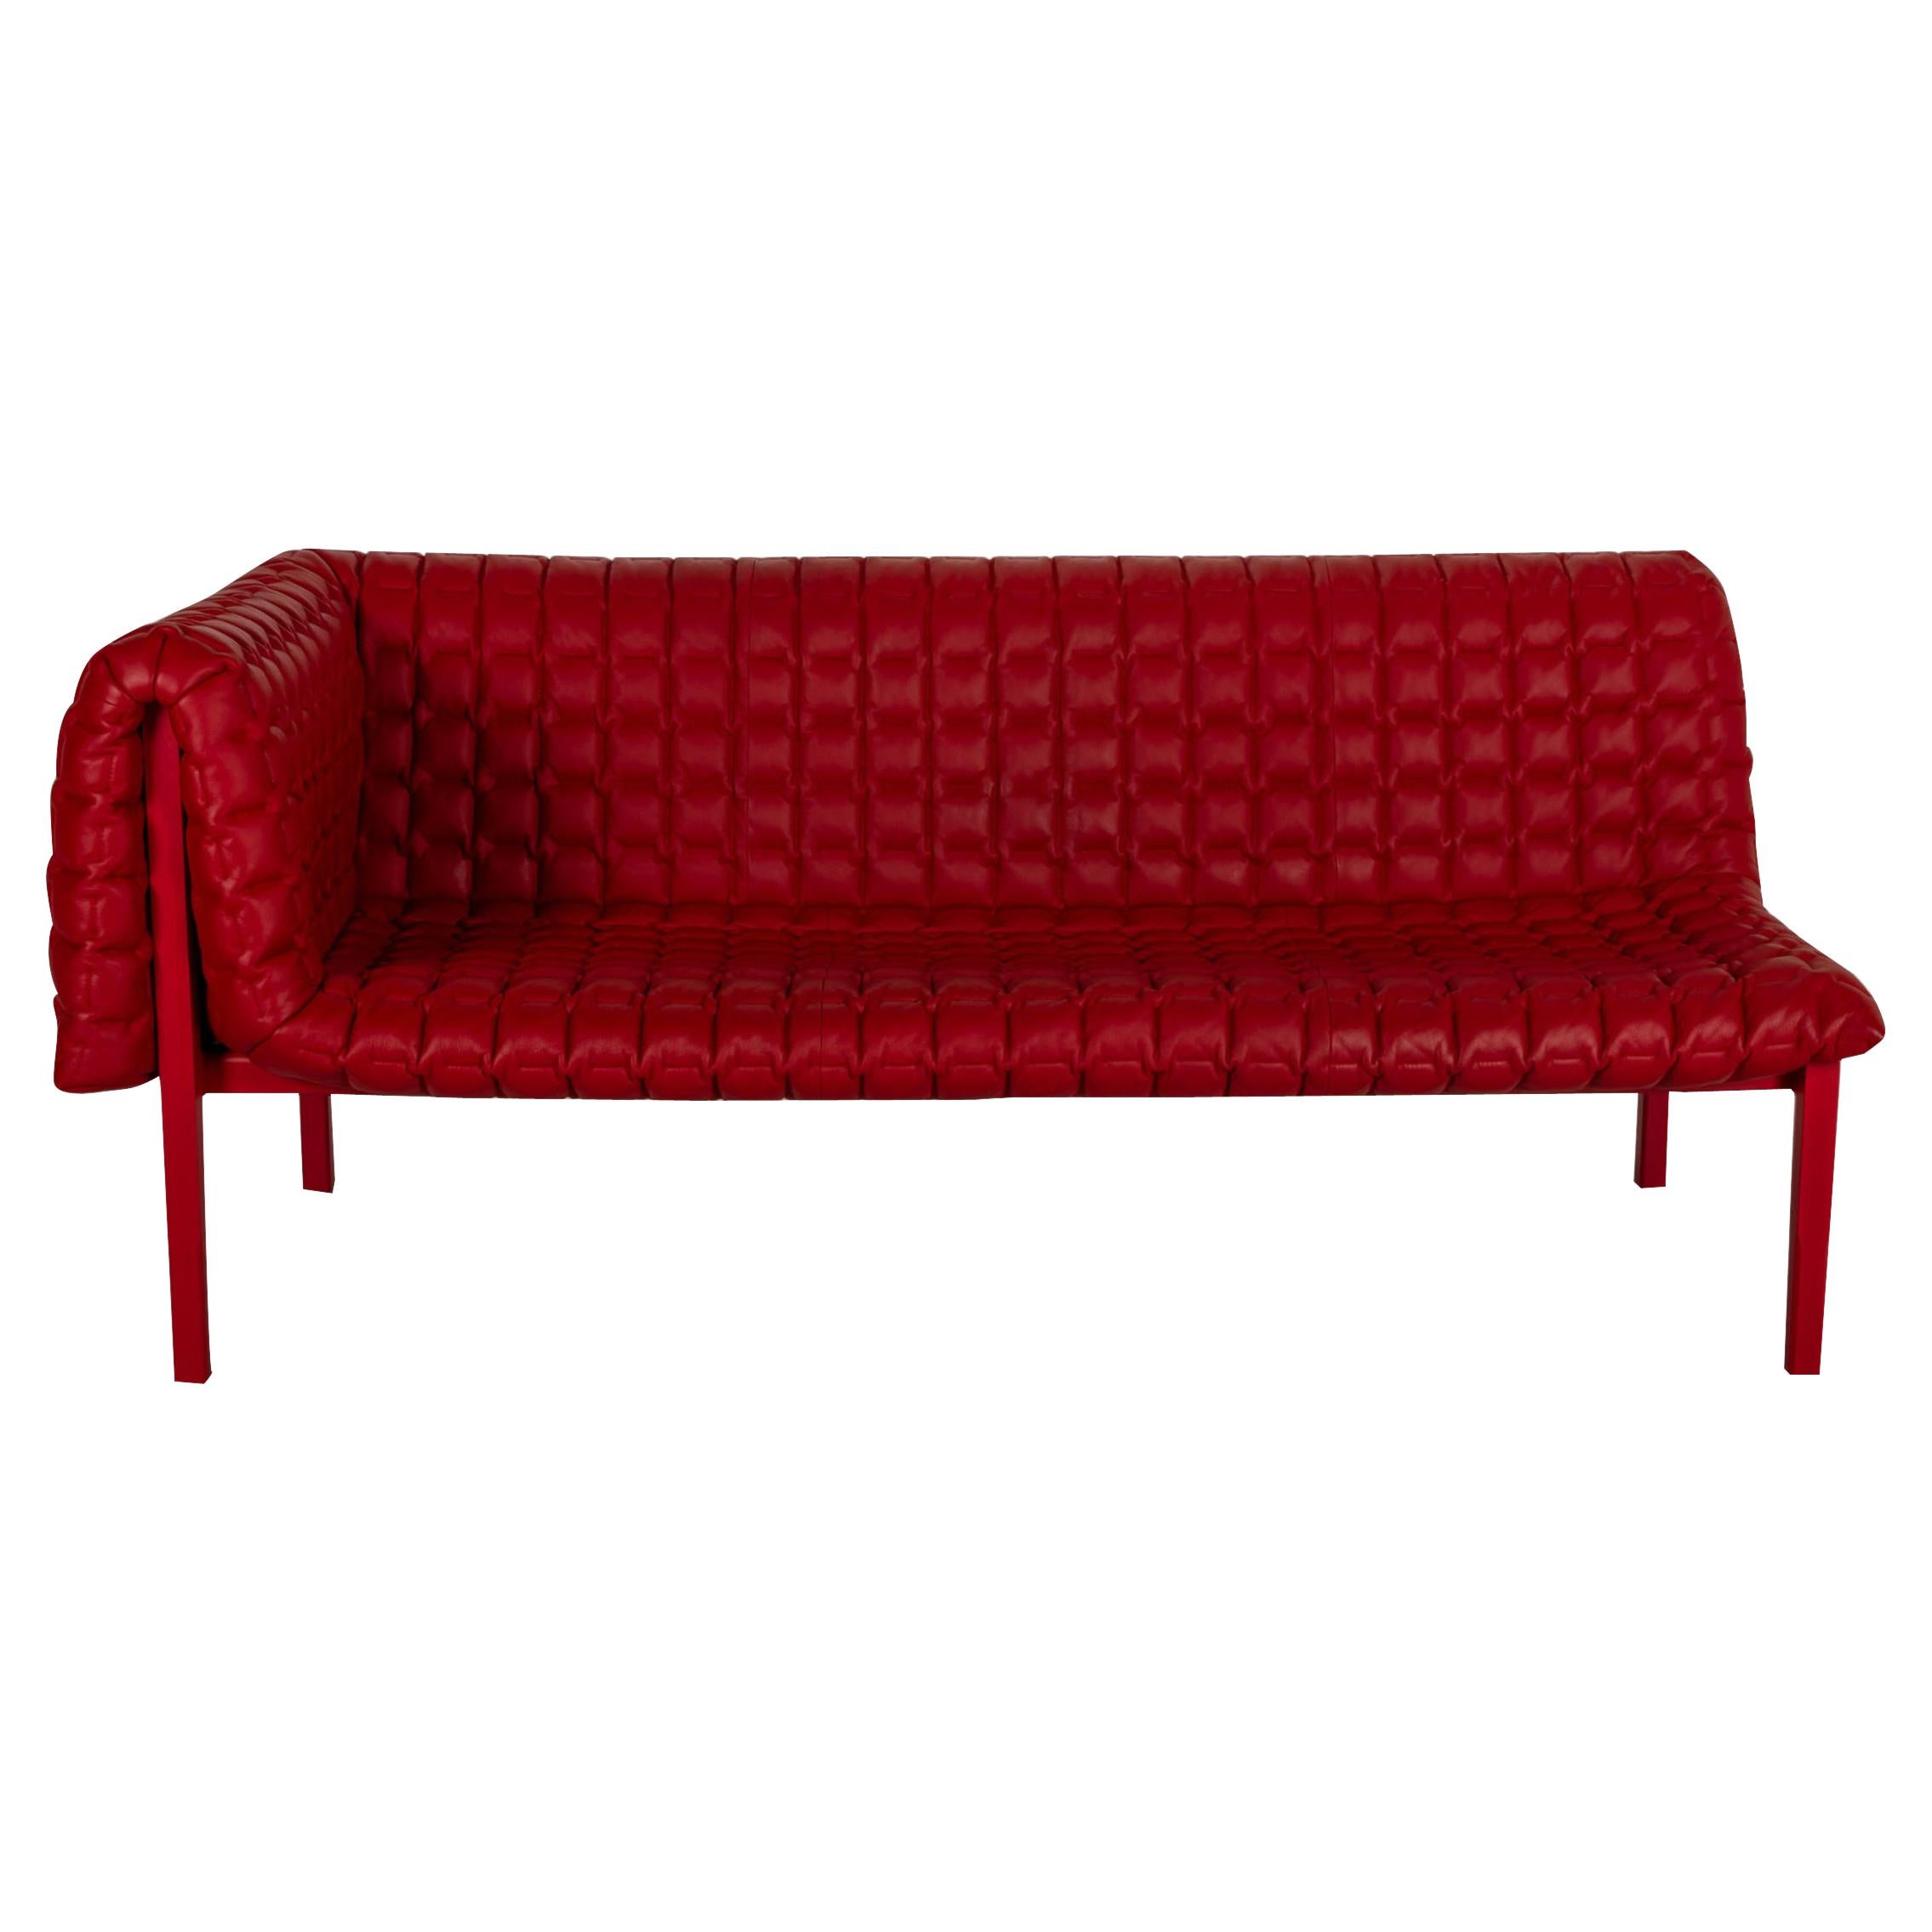 Ligne Roset Ruché Leather Lounger Red Sofa Couch Meridienne Chaise Longue For Sale